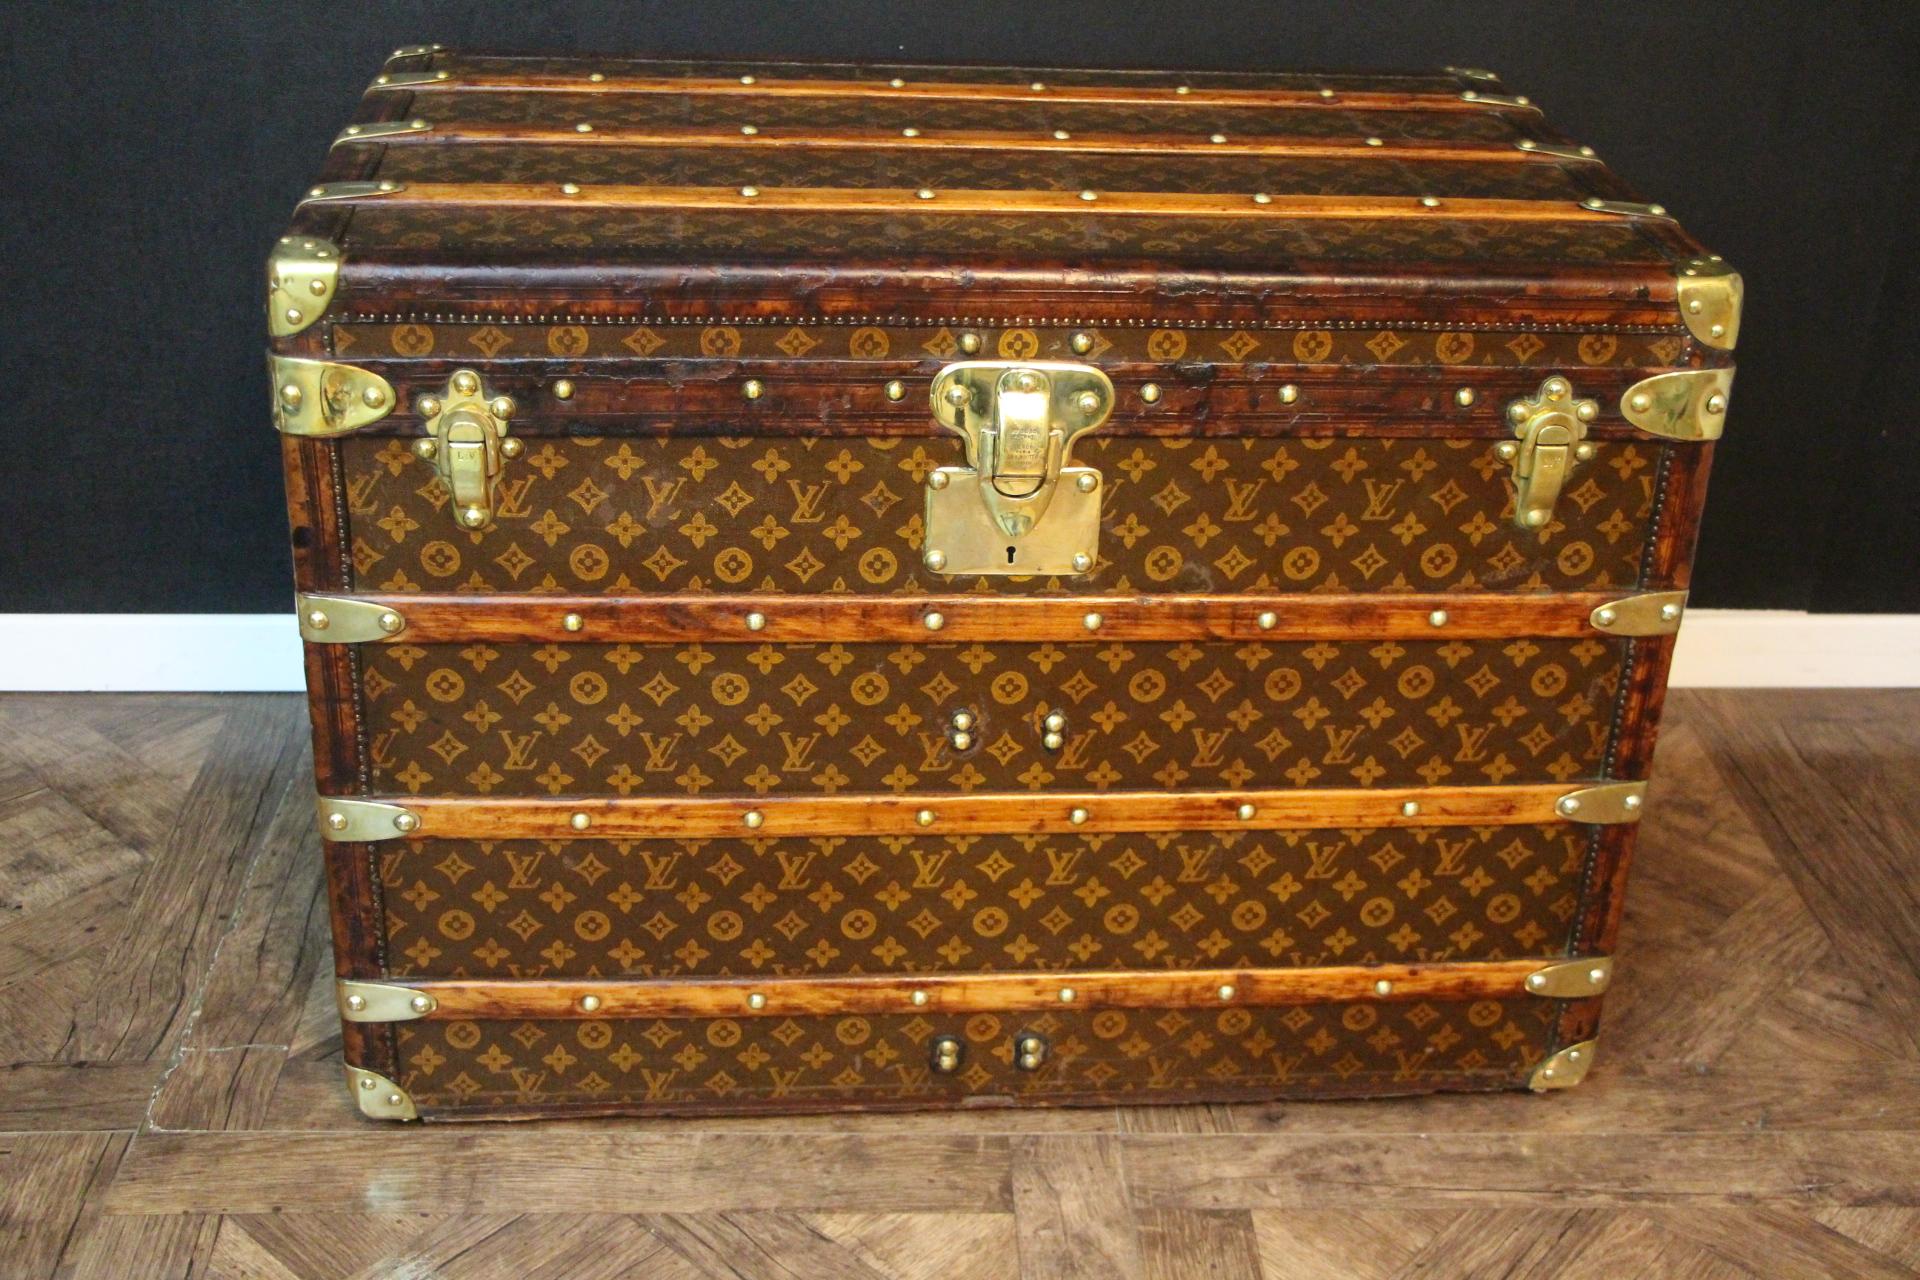 This superb Louis Vuitton steamer trunk features stenciled monogram canvas, deep chocolate color leather trim, LV stamped solid brass locks and studs as well as solid brass side handles and brass corners. It features a customized yellow and white